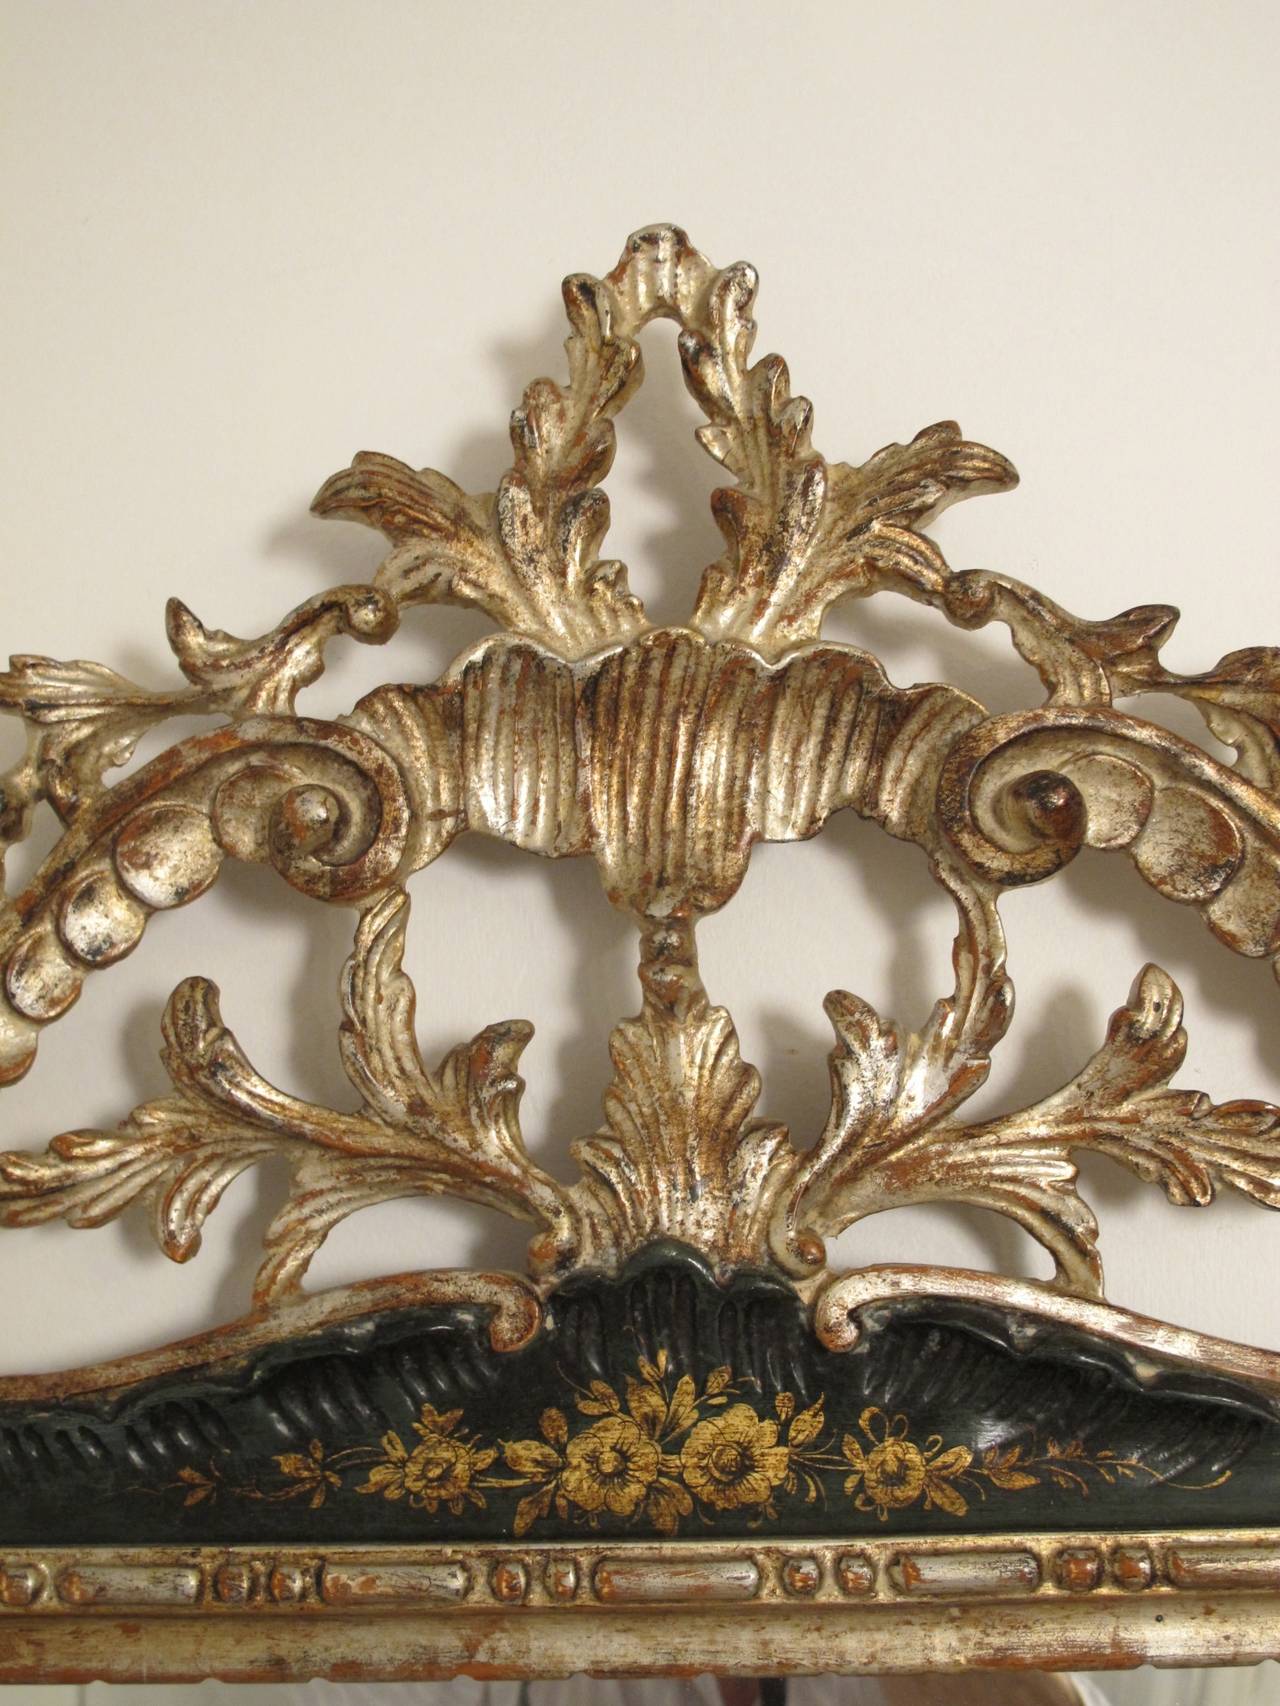 Highly carved silver gilt and parcel painted wood framed mirror. Dark forest green frame with carved acanthus and shell design. Mirror has a 1 inch bevel. Italian, 1940's-1950's.